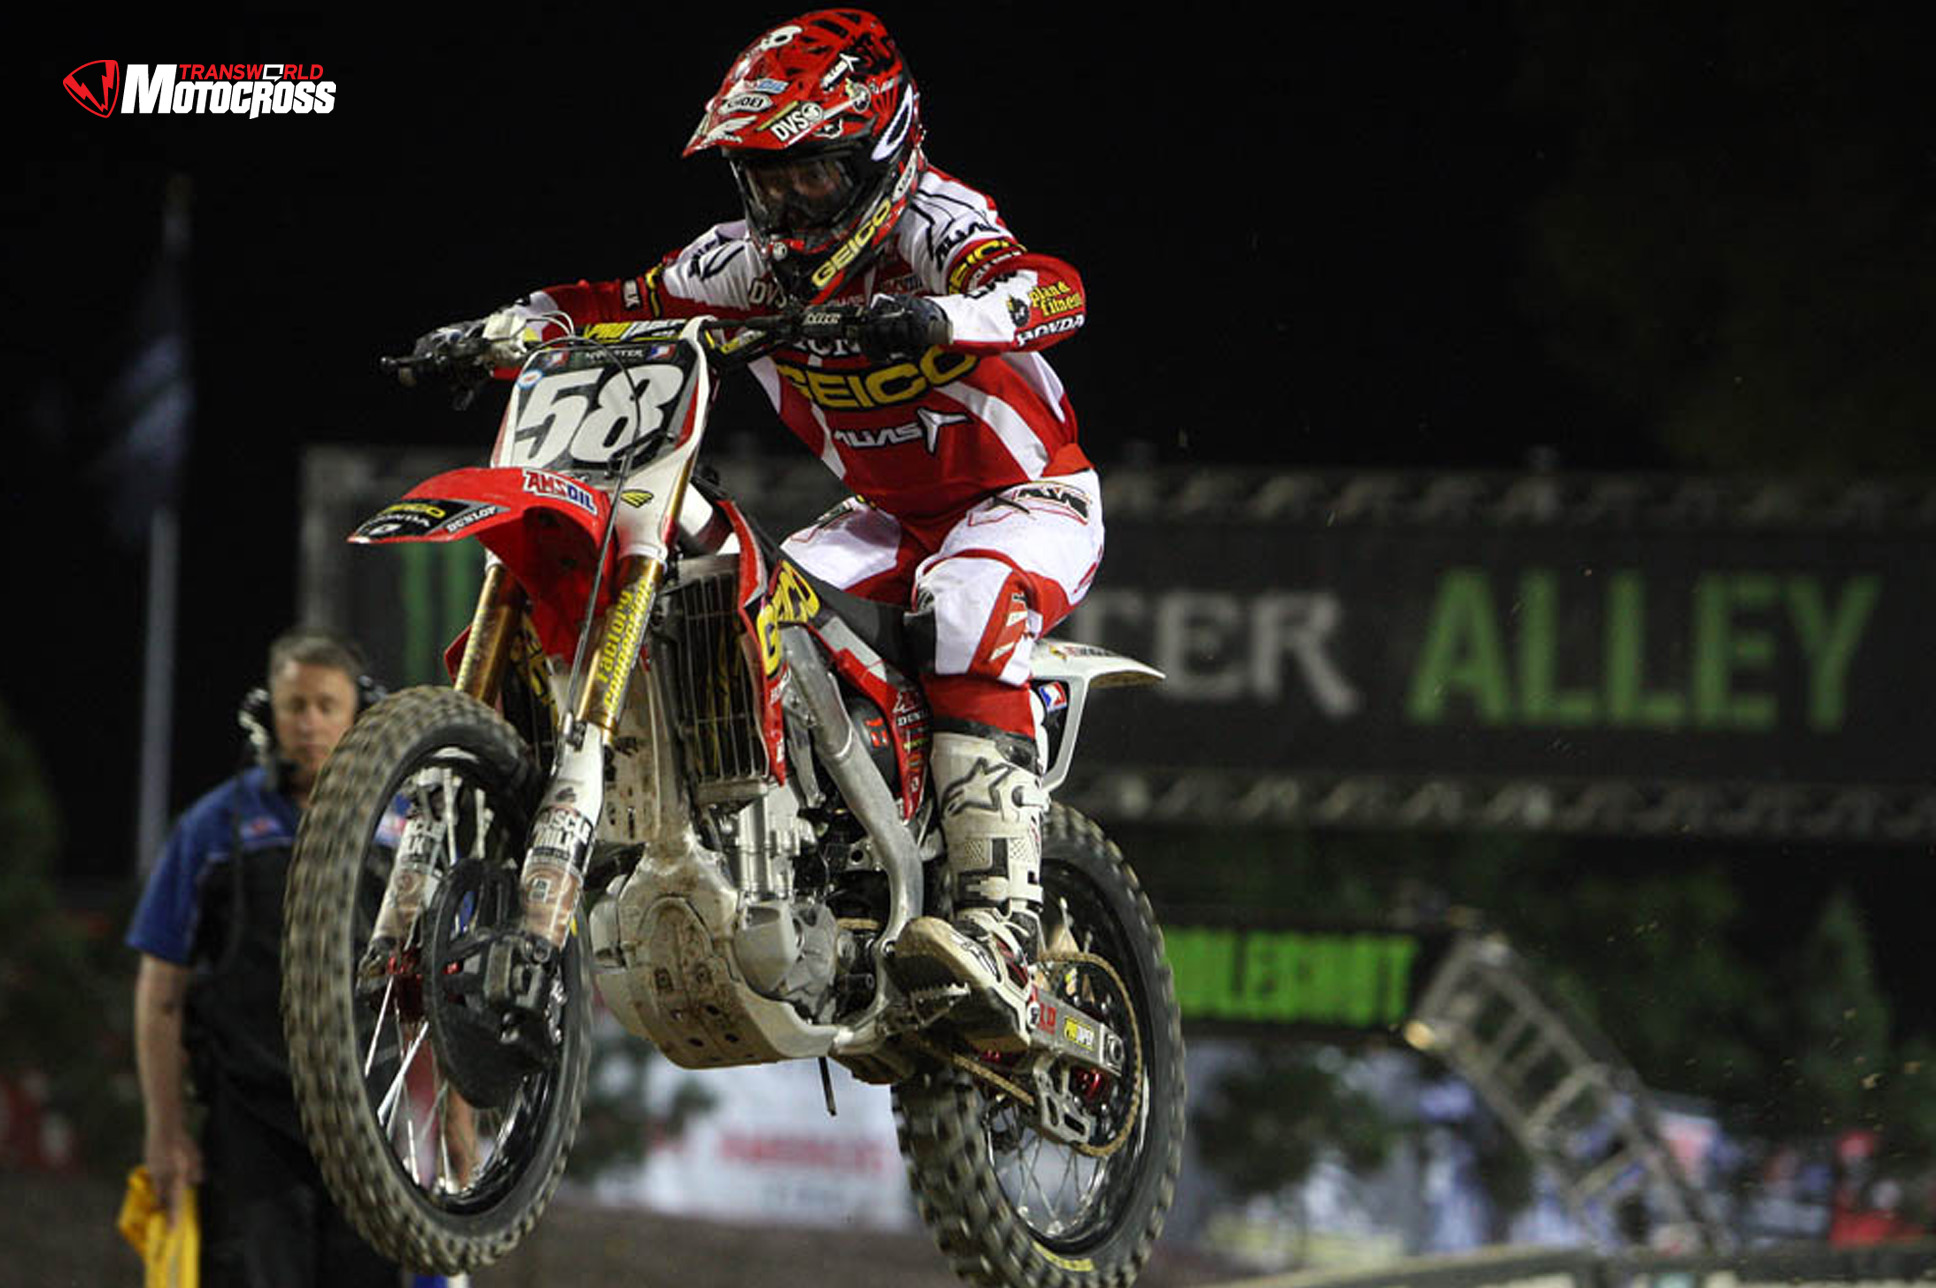 Weekly Wallpapers : Wil Hahn | Transworld Motocross